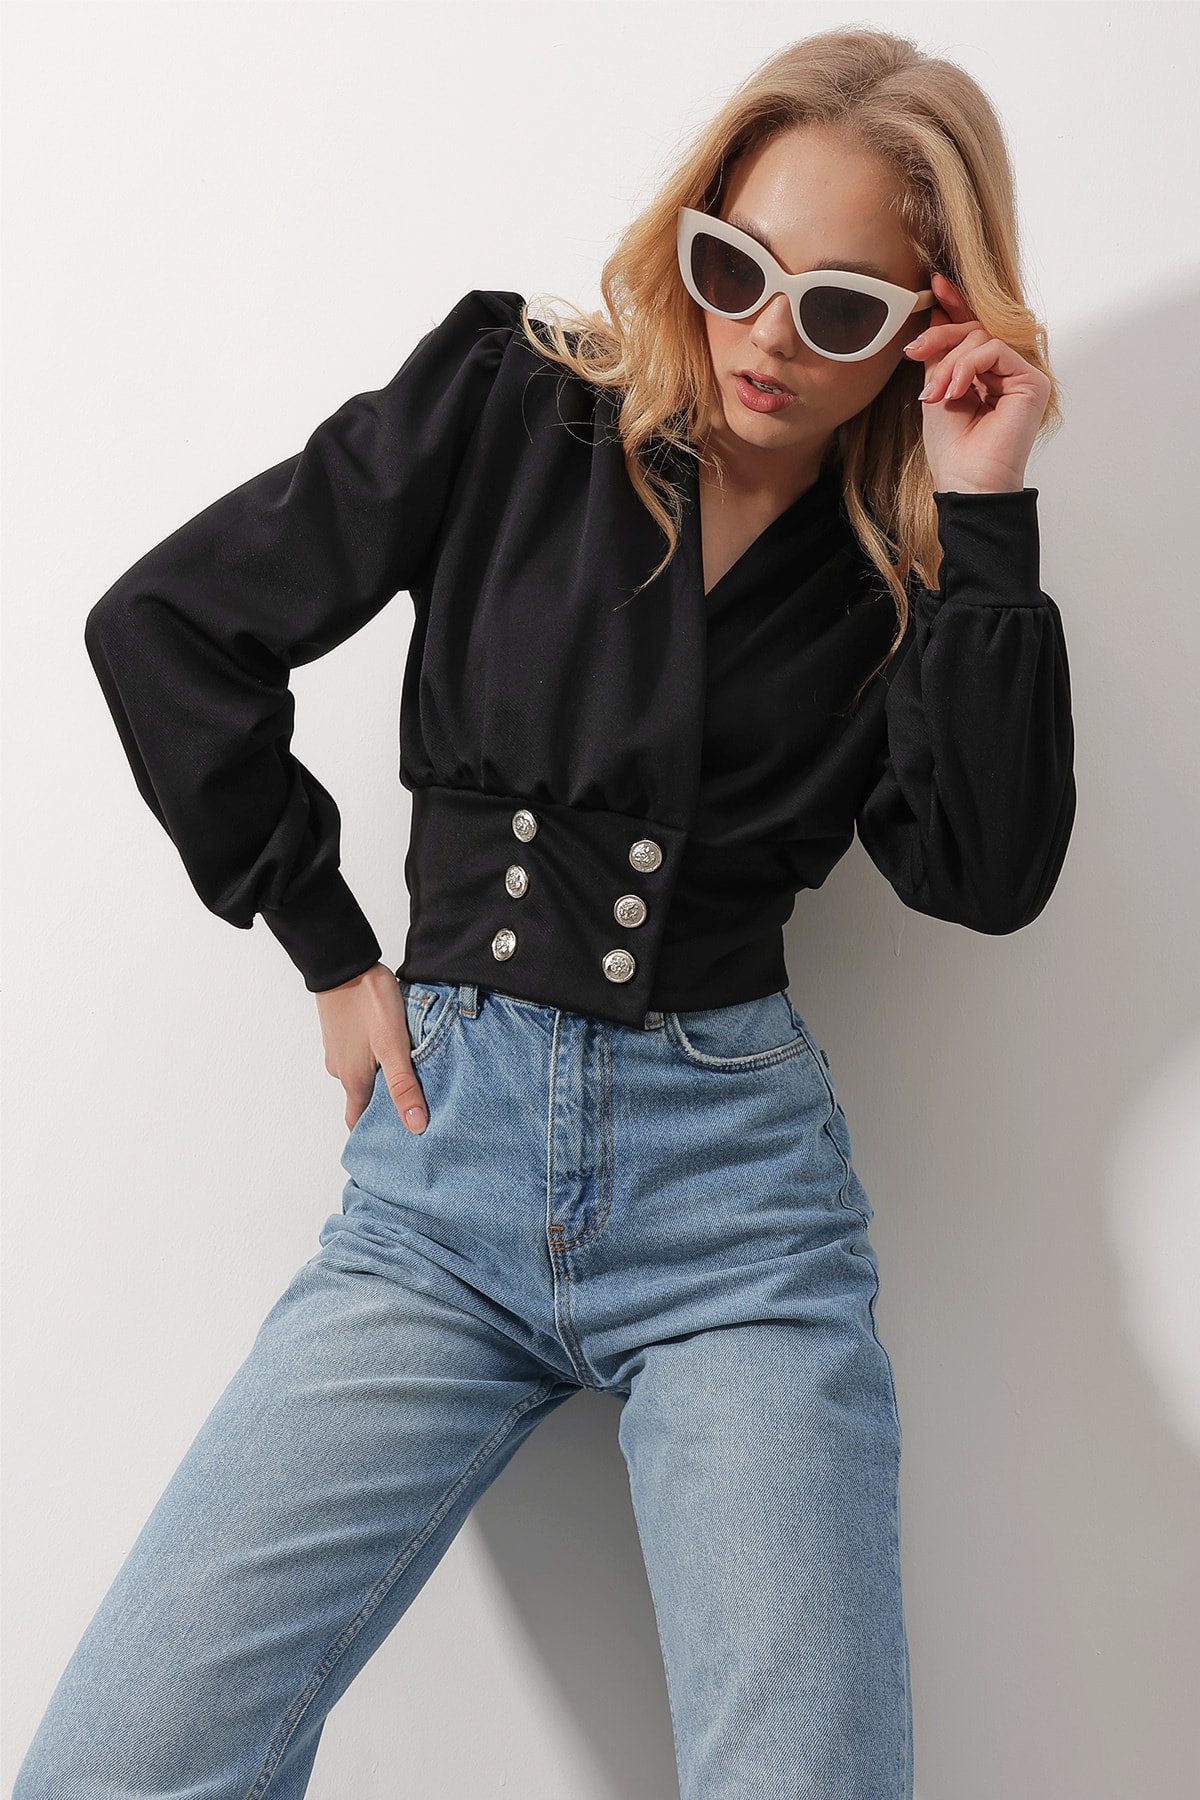 Alacati Black Double Breasted Collar Princess Sleeve Gold Button Detailed Crop Top